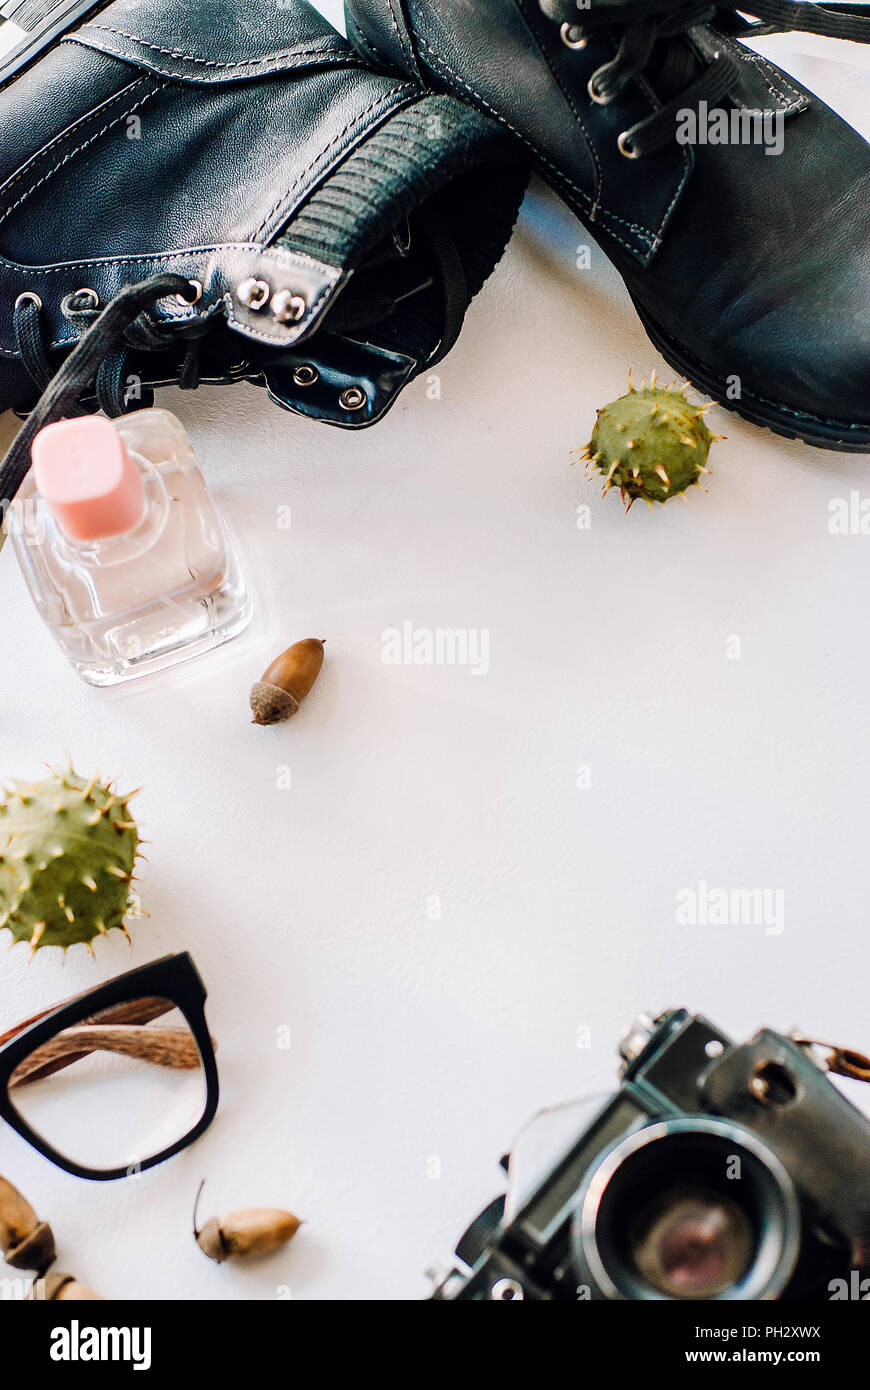 black boots lie with the camera, glasses and acorns. Stock Photo